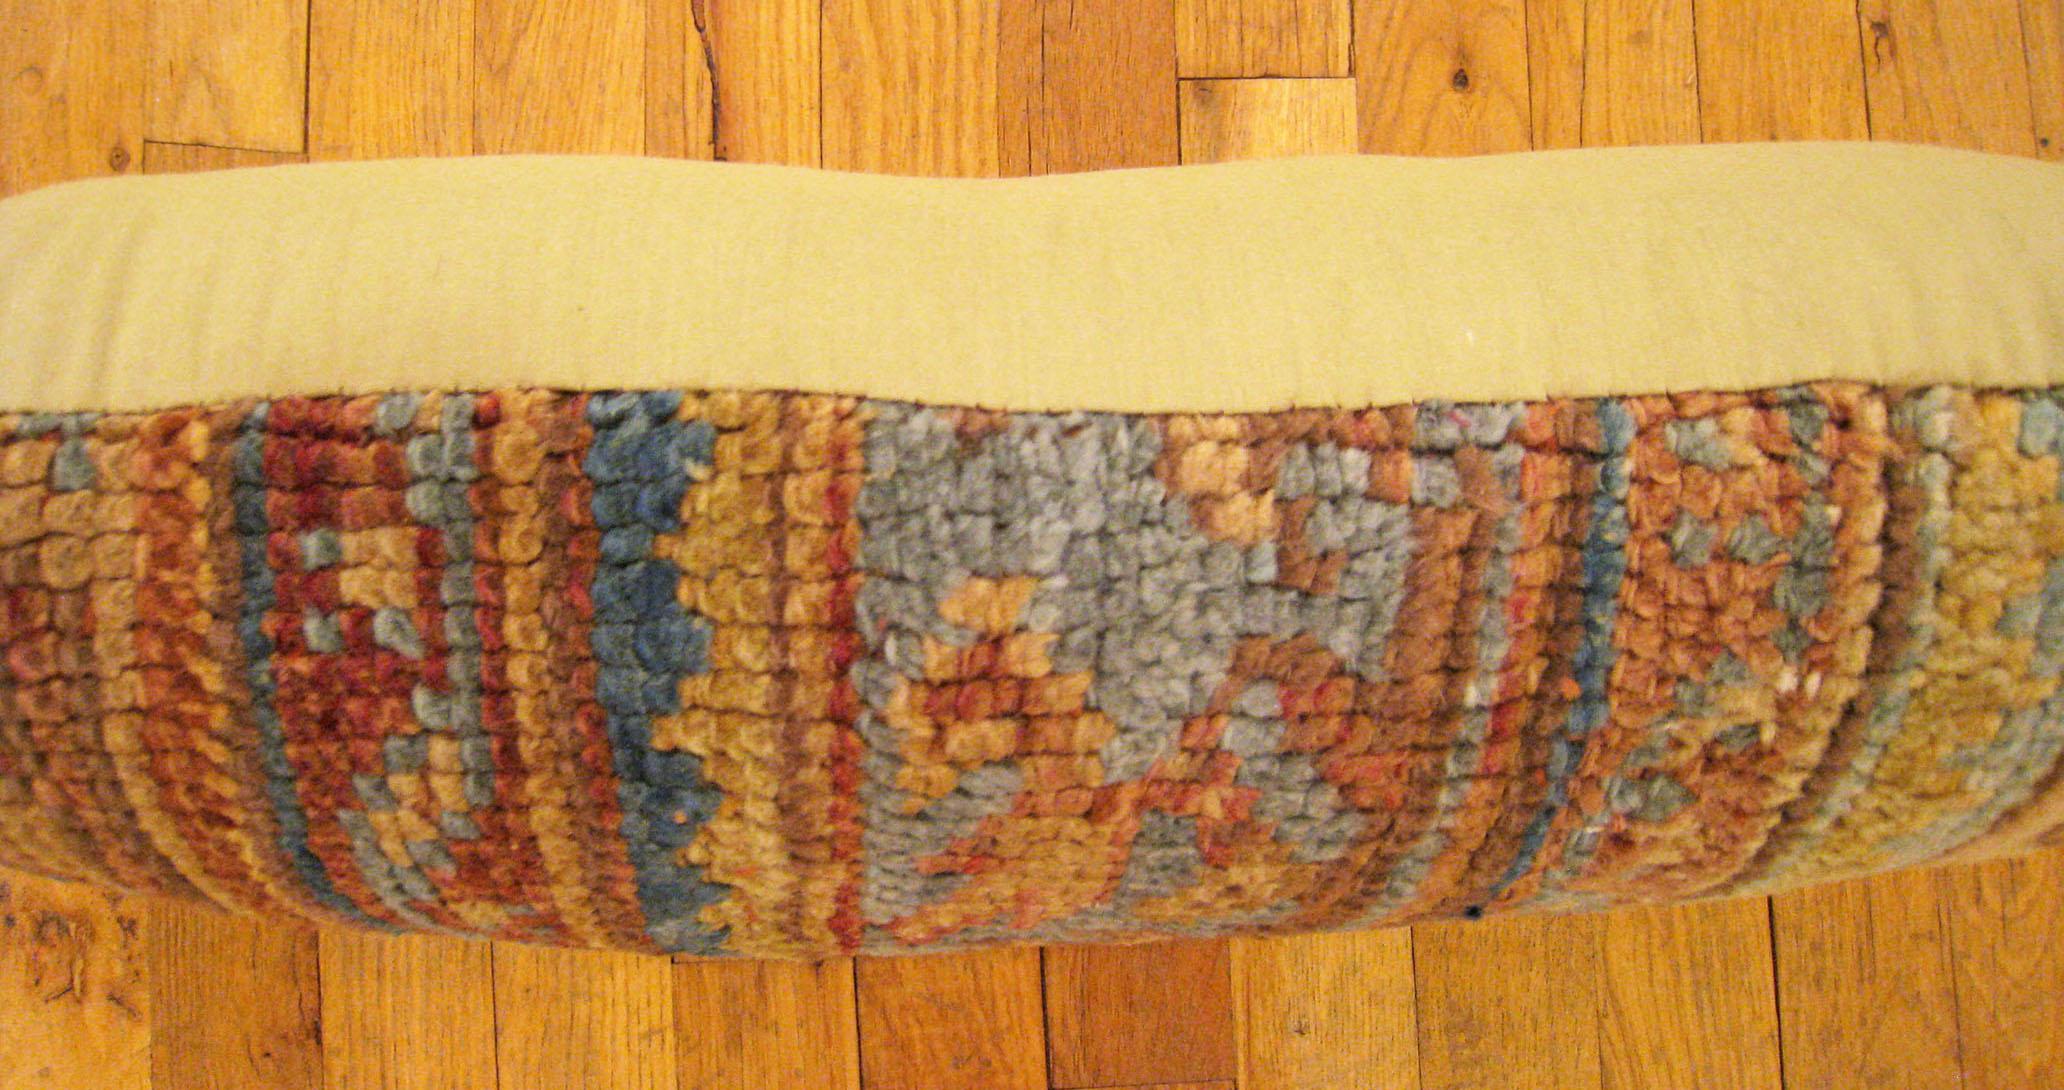  Decorative Antique Turkish Oushak Rug Pillow with Geometric Abstracts Motif In Good Condition For Sale In New York, NY